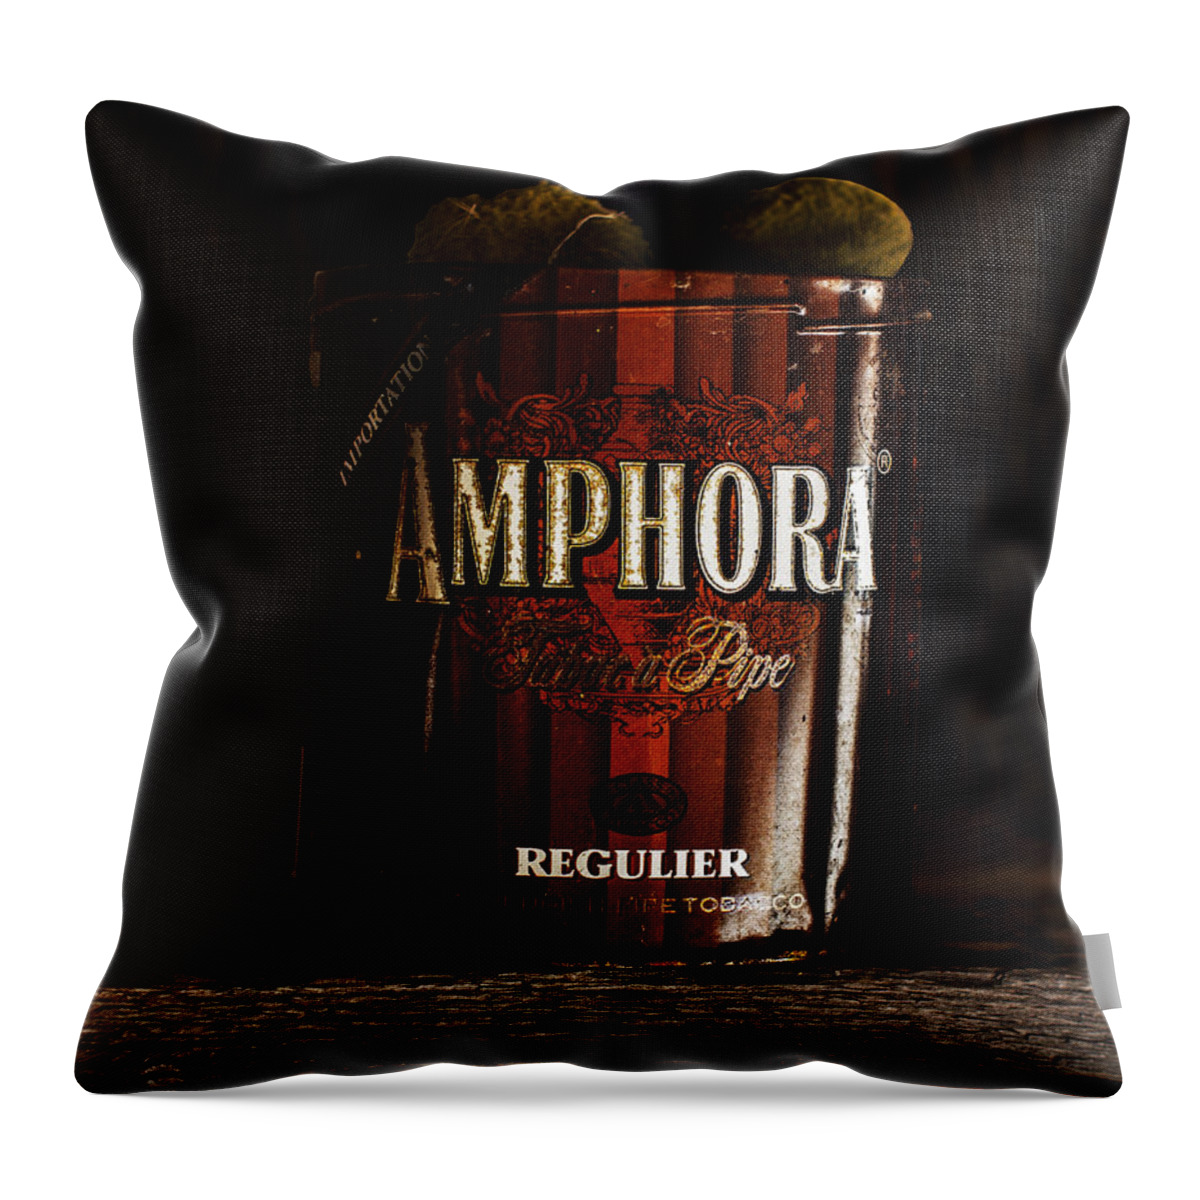 Antique Throw Pillow featuring the photograph Old Tobacco Can by Fred Denner